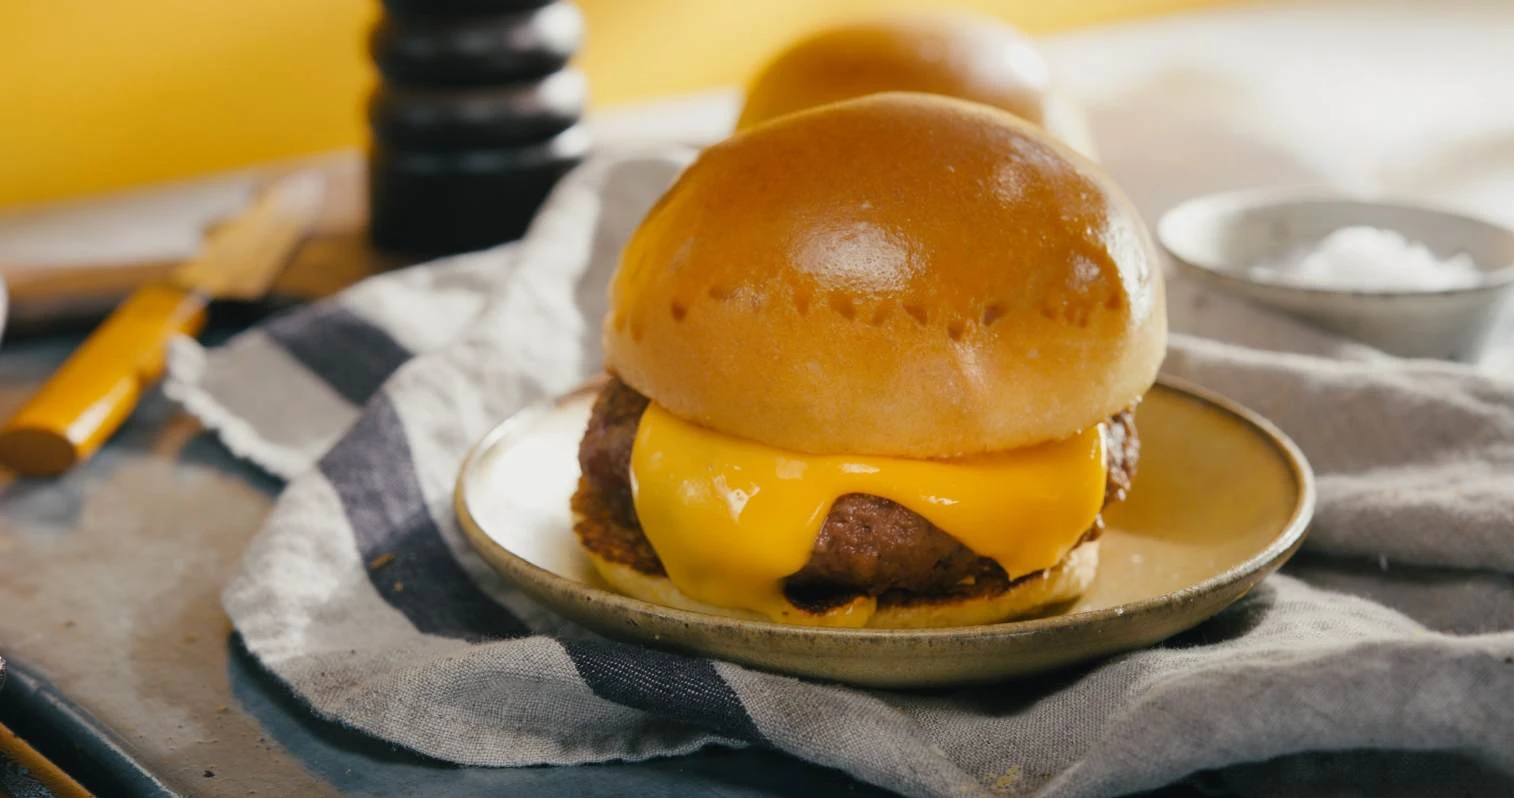 Impossible Cheeseburger being put on a plate with a knife in the background